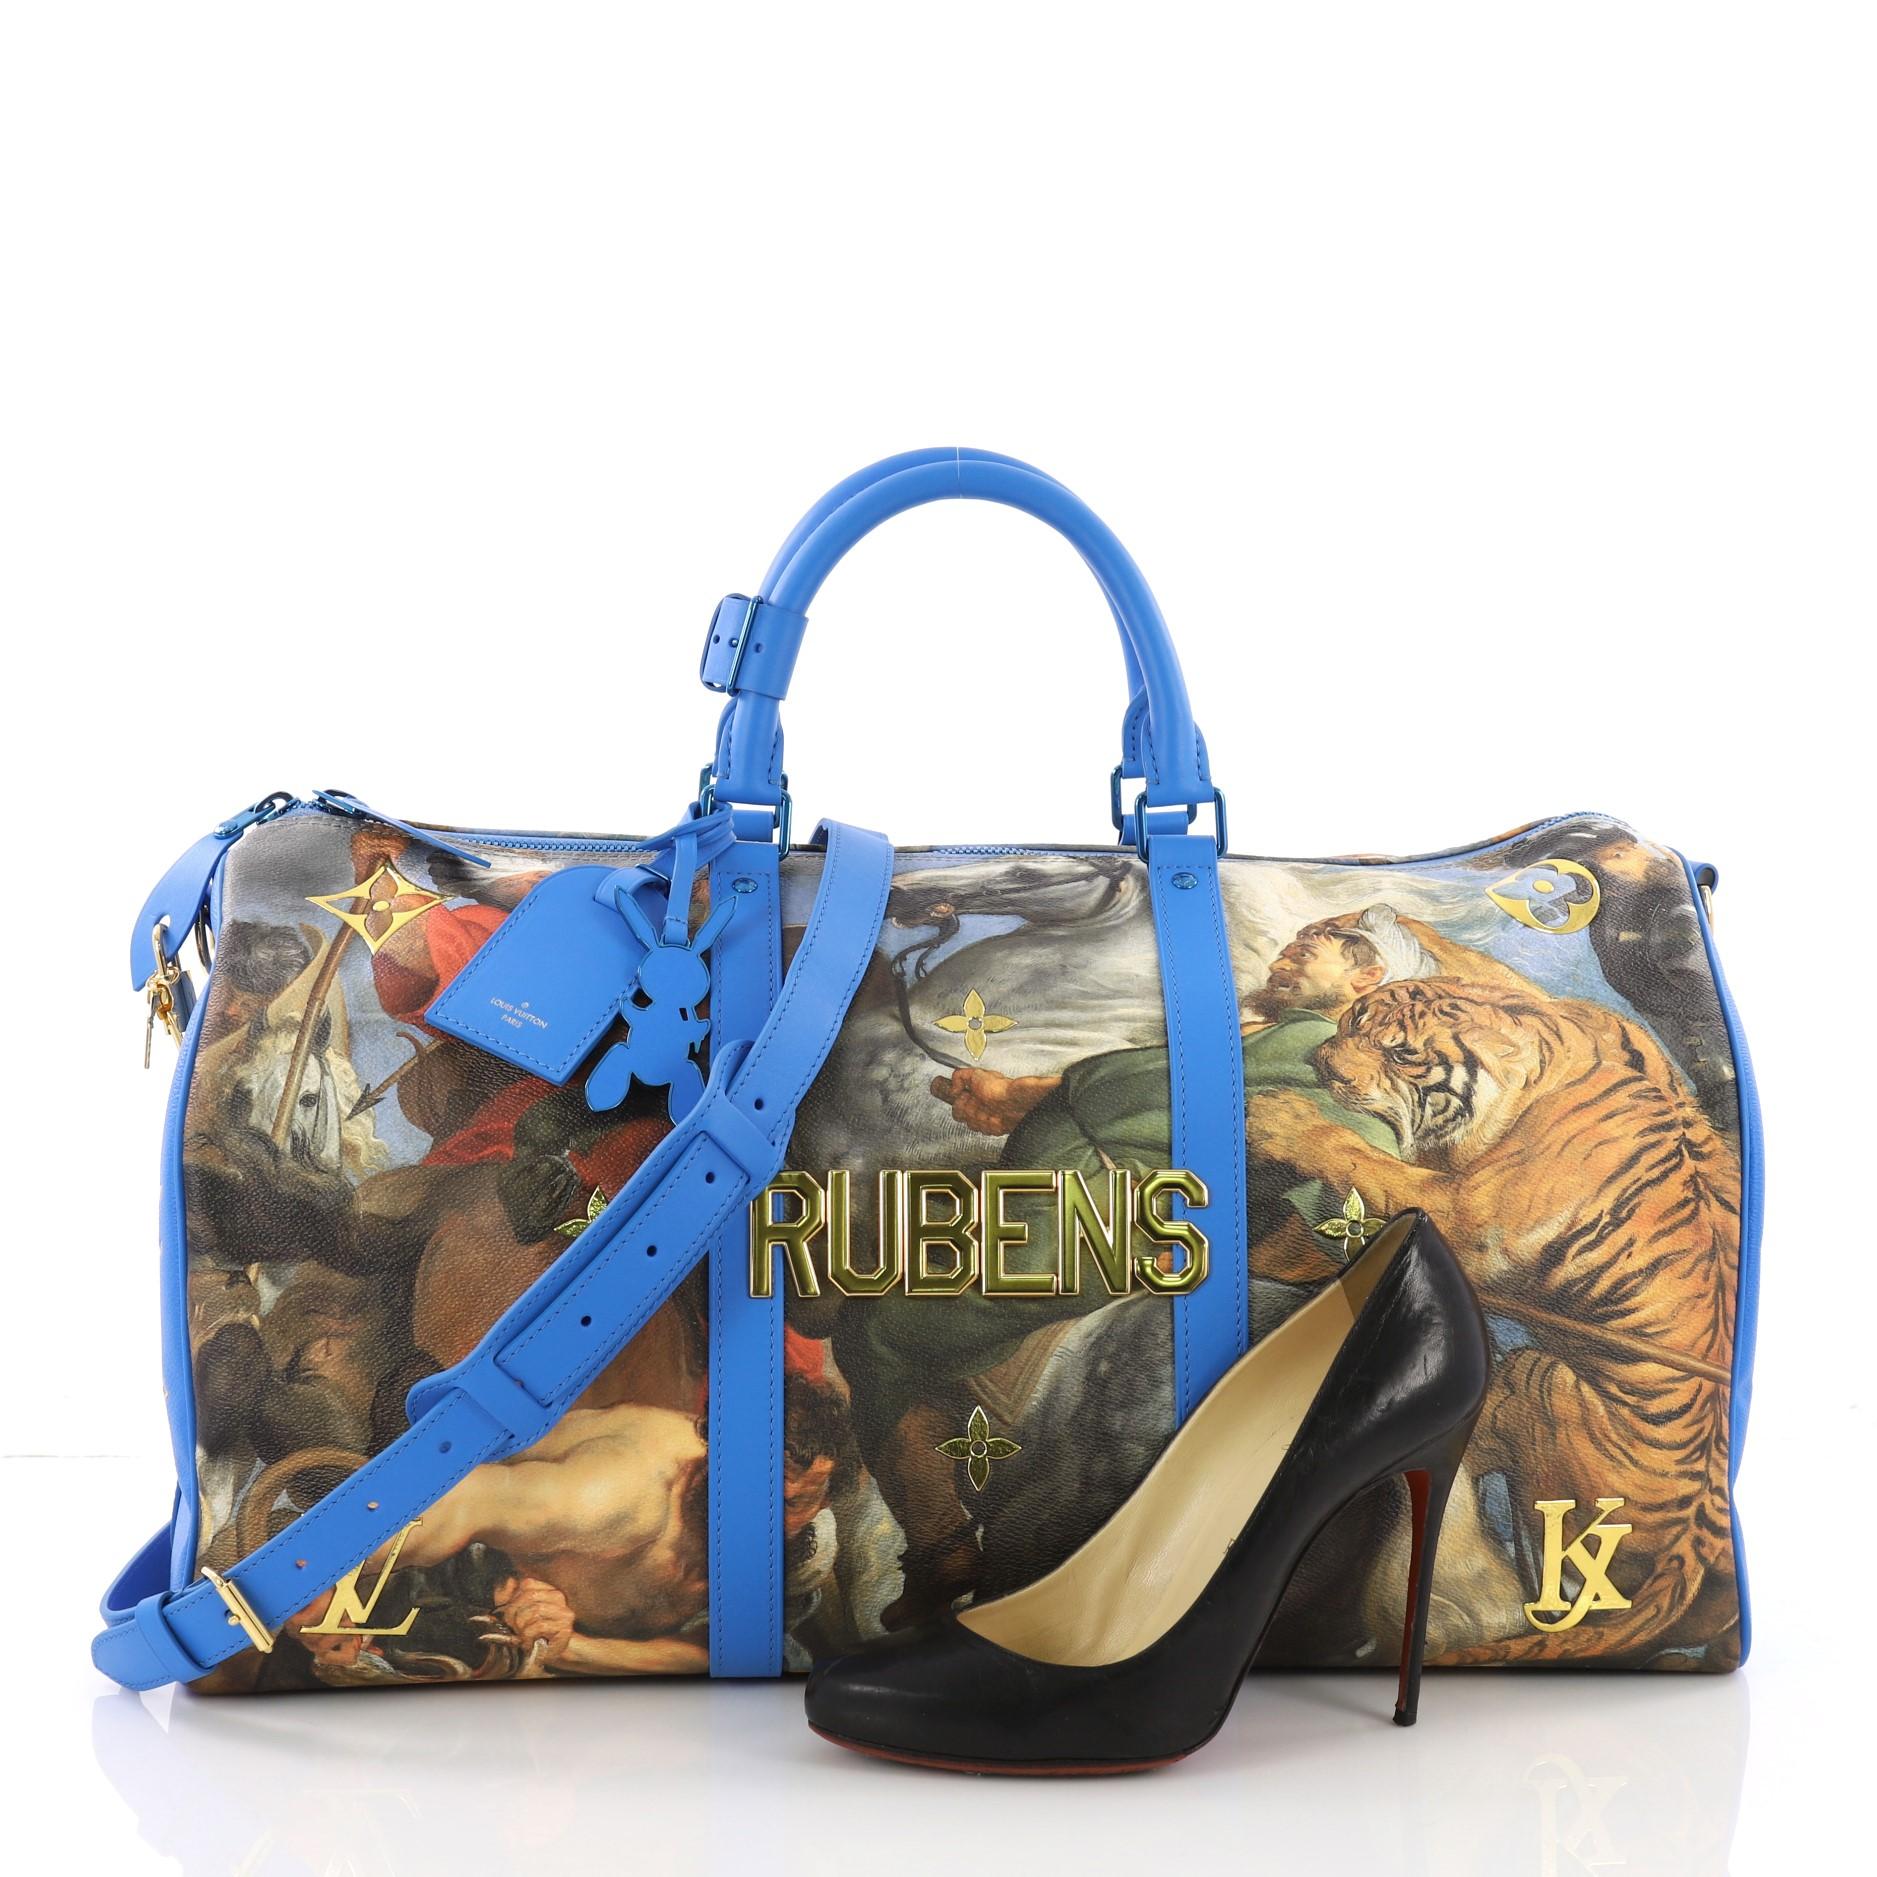 This Louis Vuitton Keepall Bandouliere Bag Limited Edition Jeff Koons Rubens Print Canvas 50, crafted from blue printed coated canvas, features dual rolled handles, gold monogram and flower applique, reflective 'Rubens' metallic letters, and